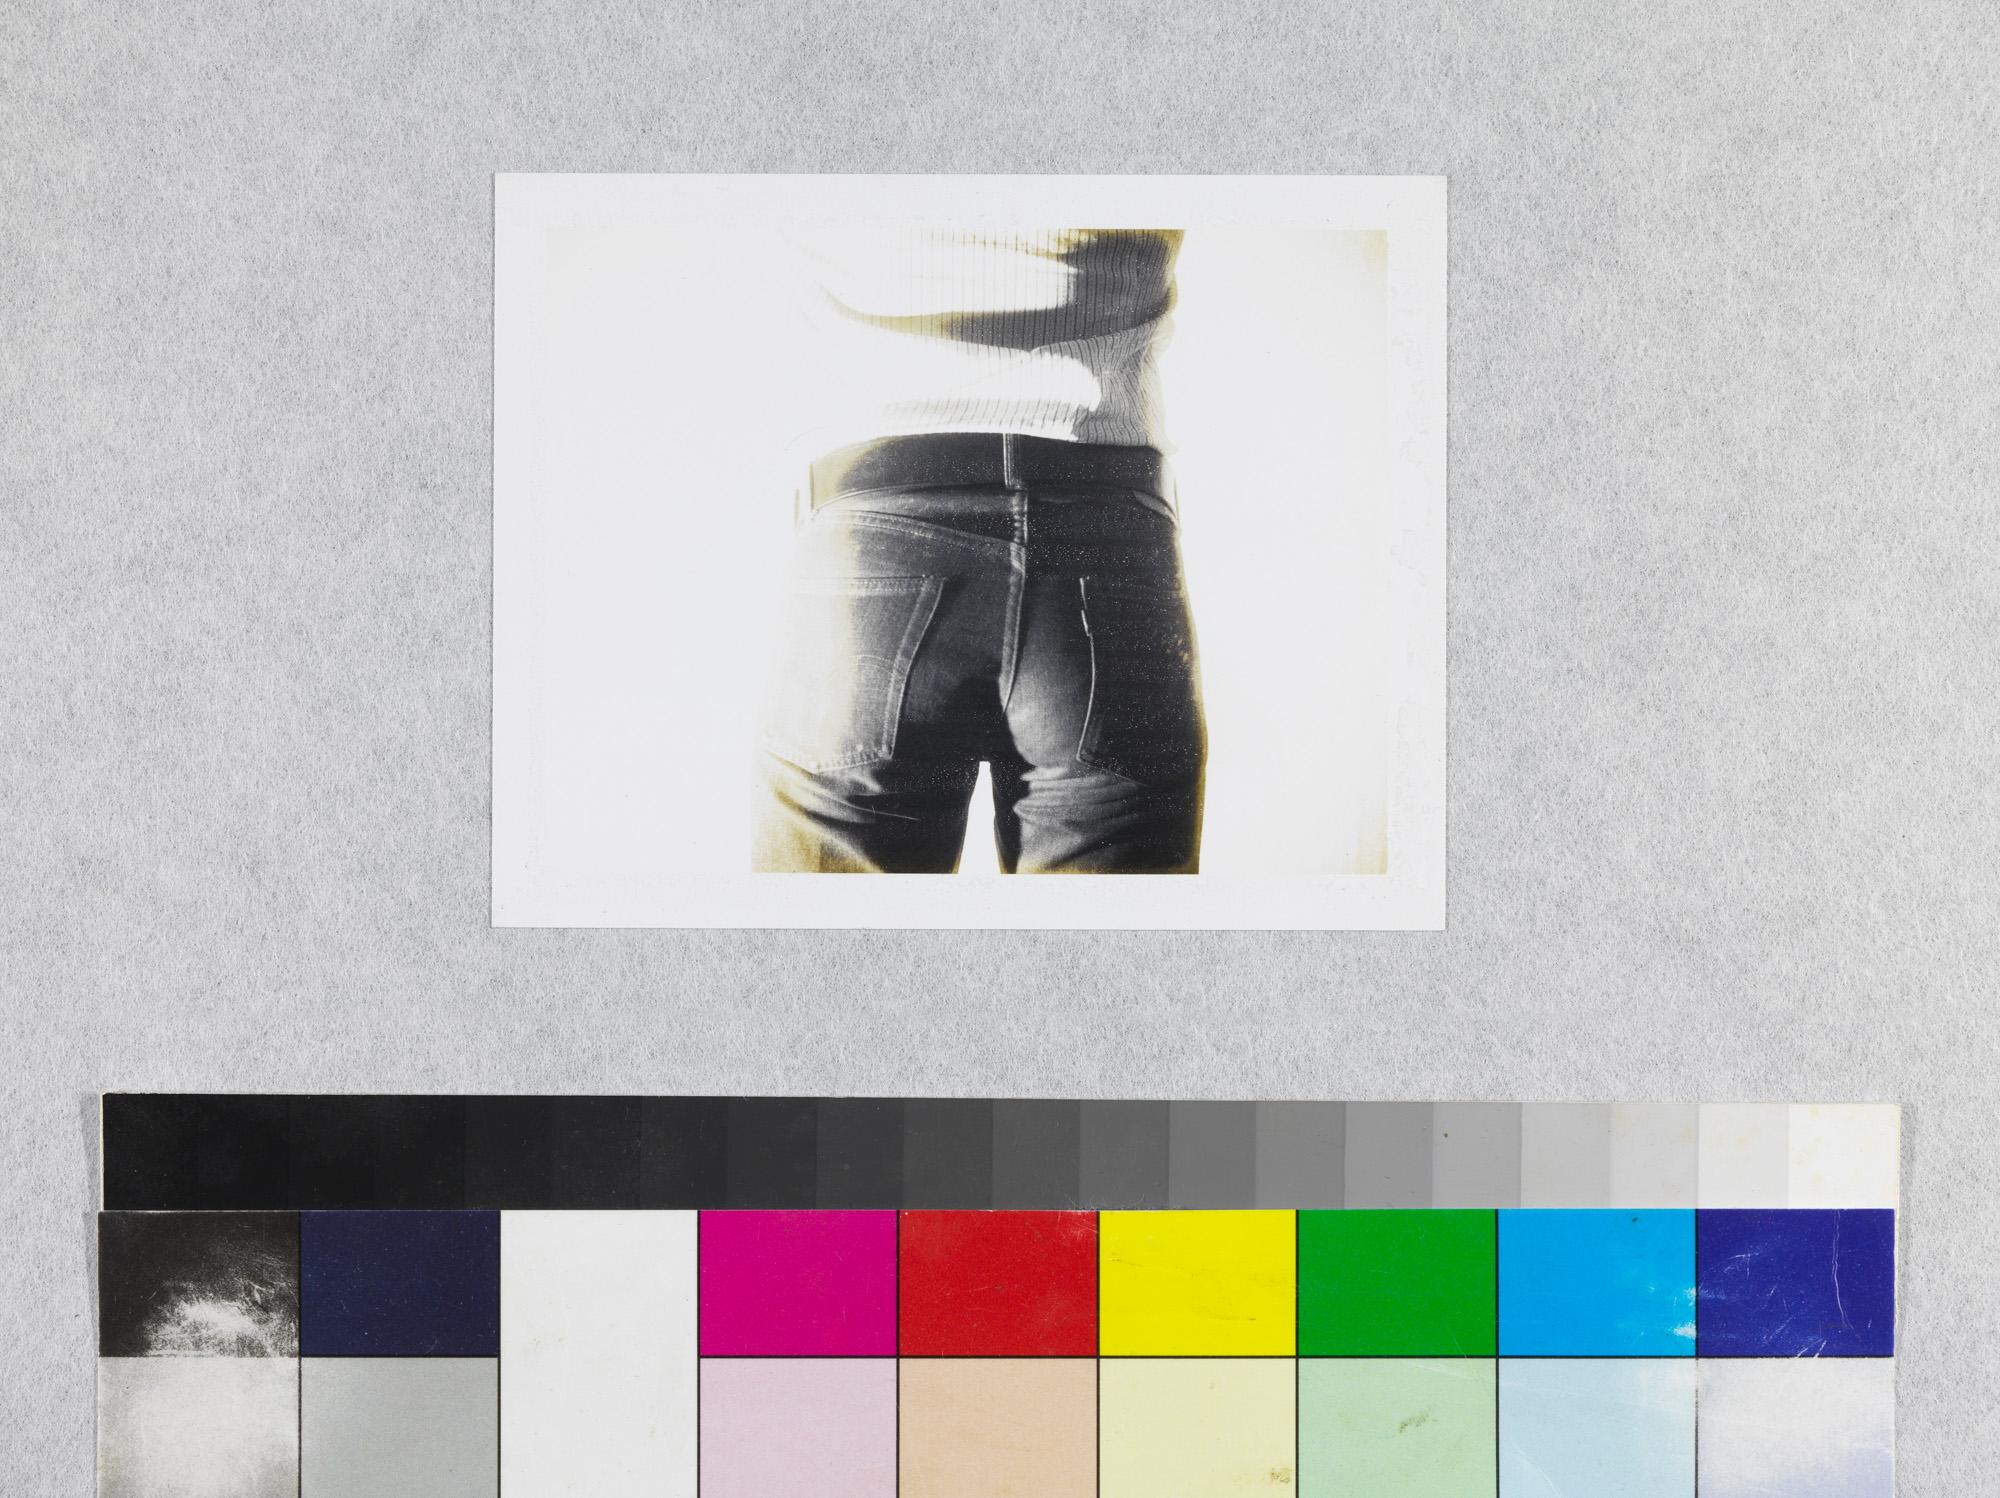 Study for Rolling Stones' 'Sticky Fingers' Album Cover - Polaroid - Pop Art Photograph by Andy Warhol